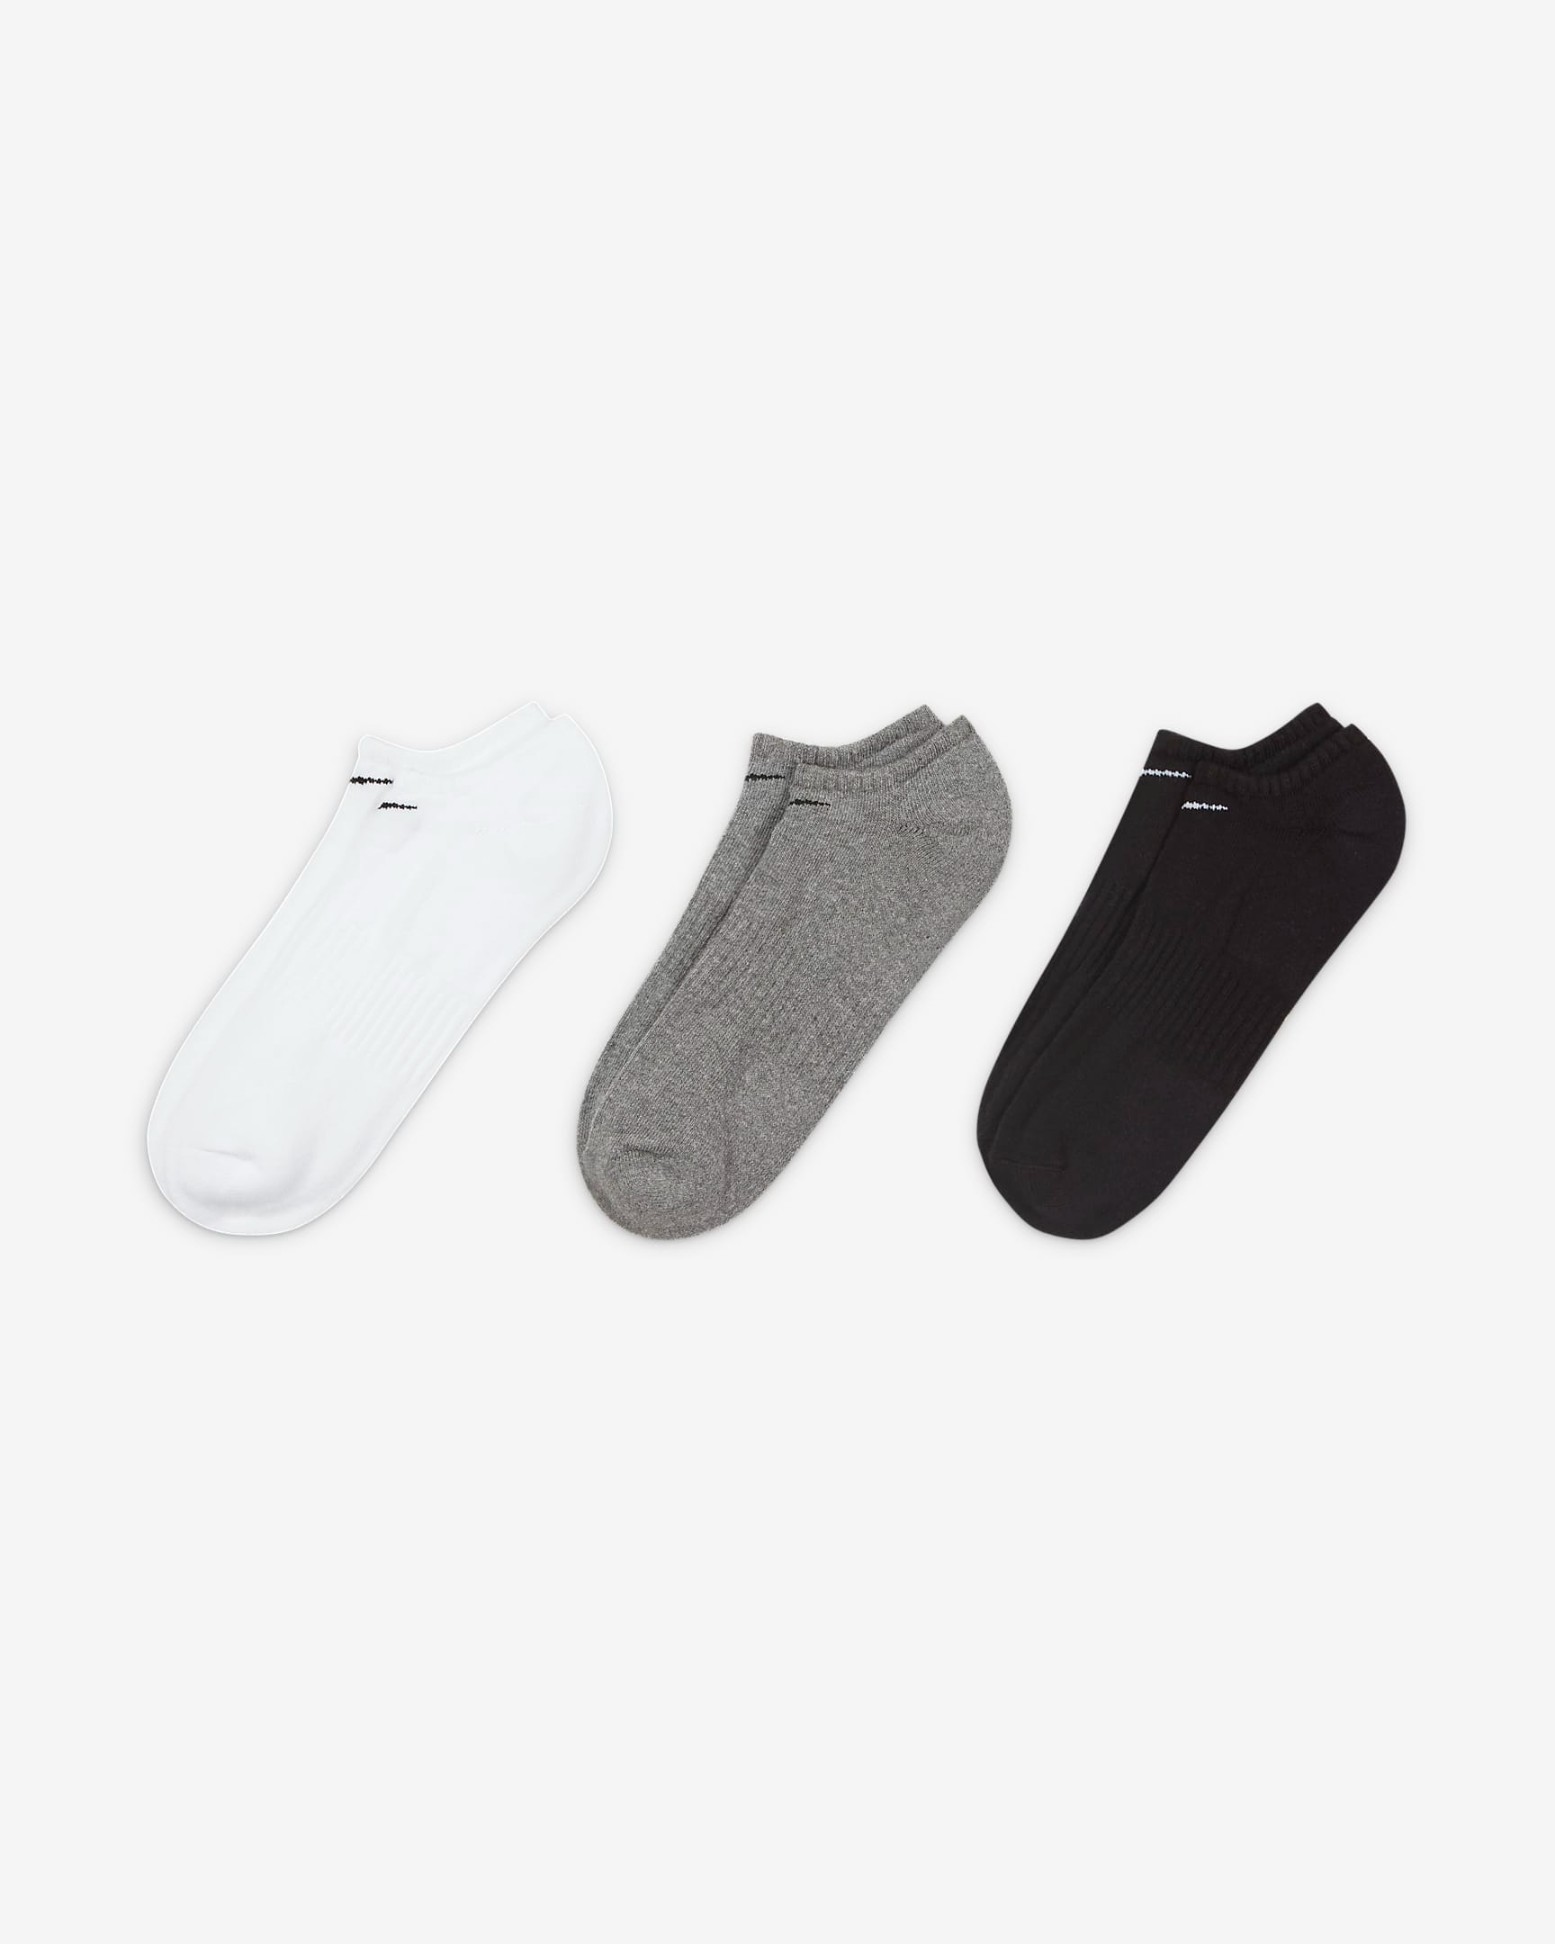 CALCETINES NIKE EVERYDAY CUSHIONED TRAINING NO-SHOW BLANCO / MULTI